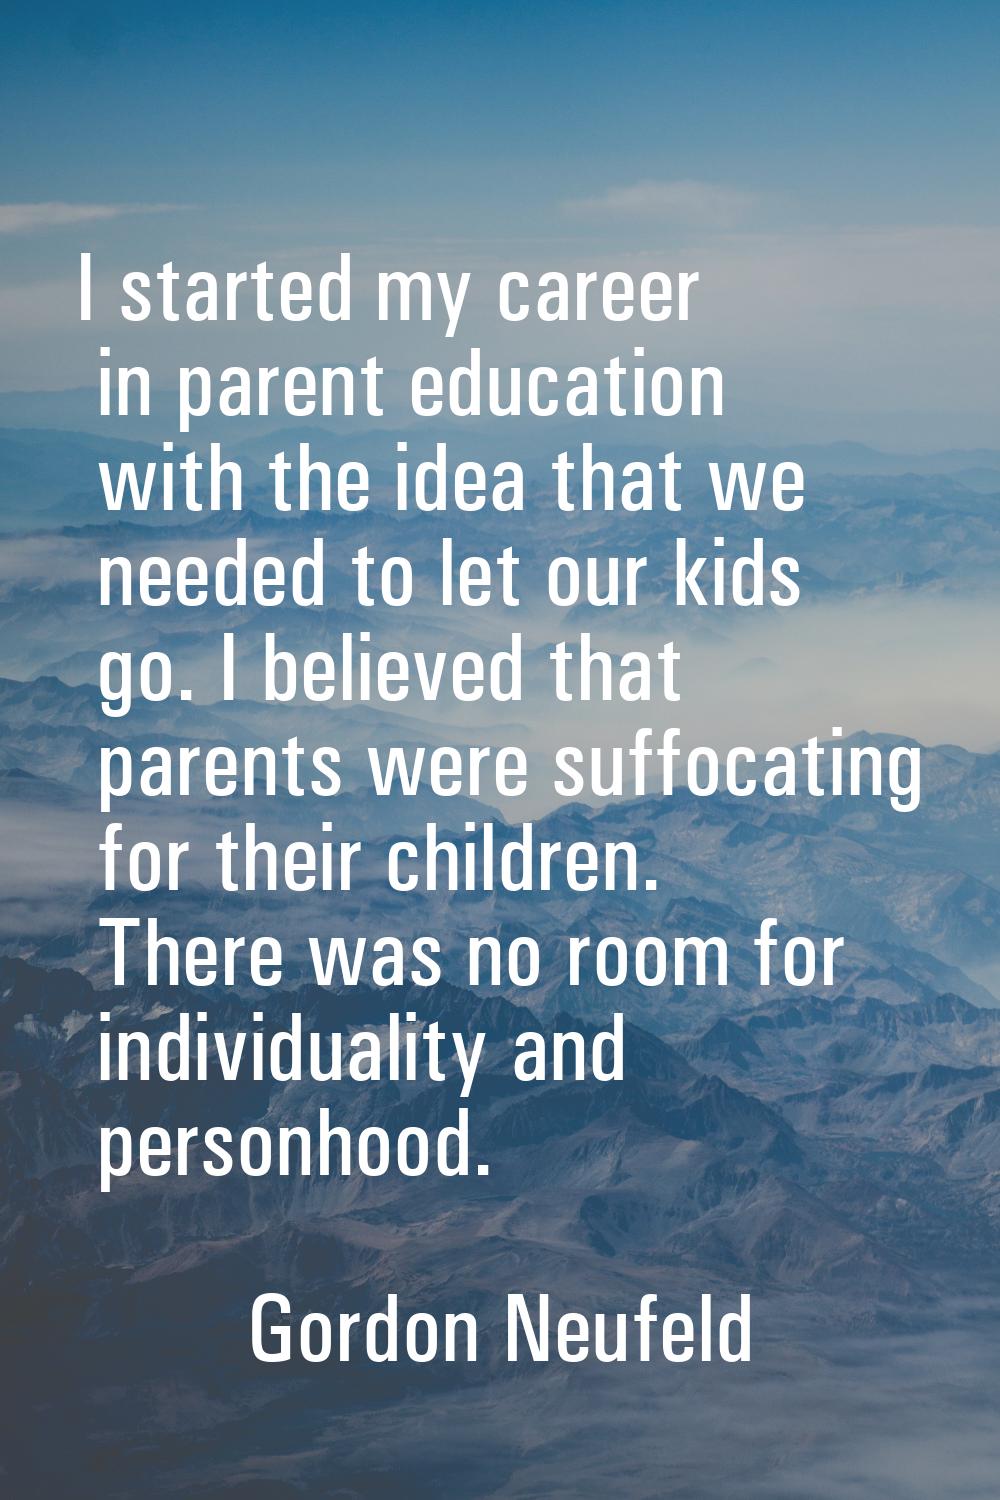 I started my career in parent education with the idea that we needed to let our kids go. I believed